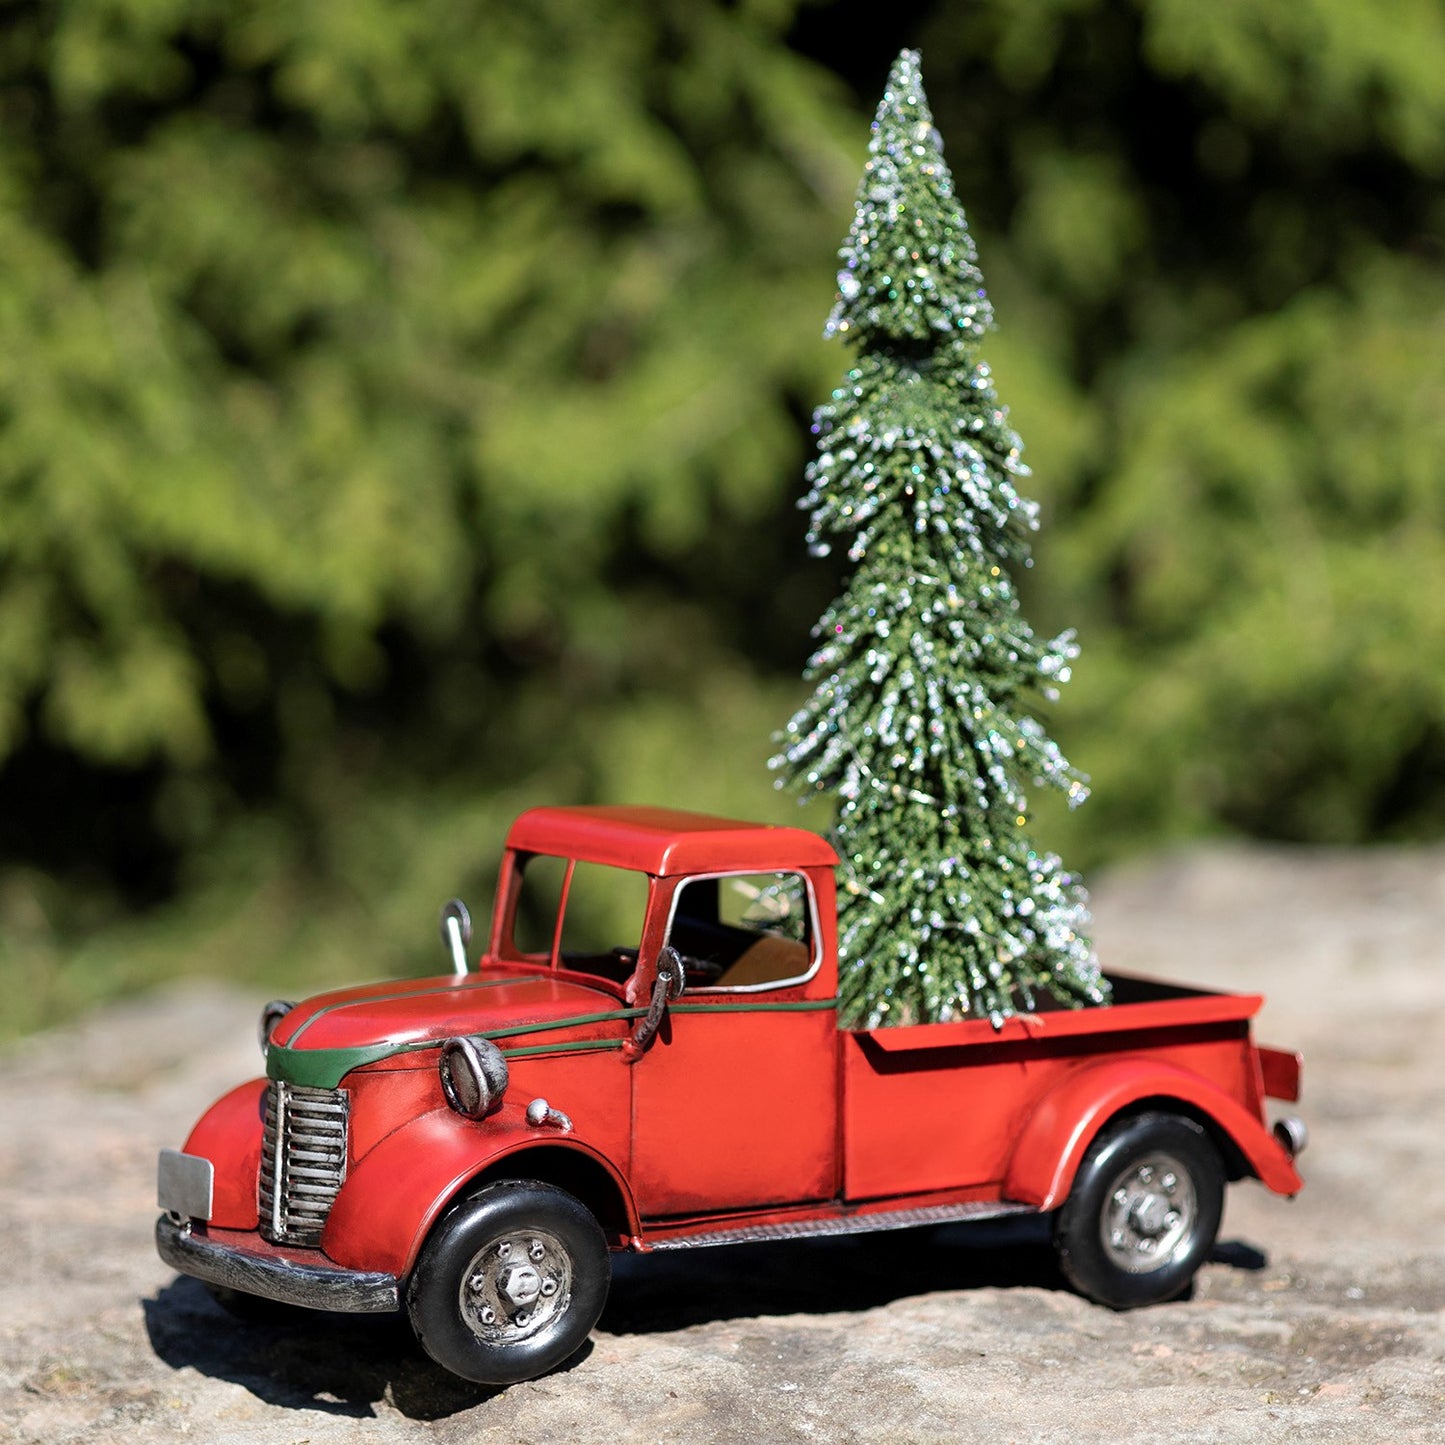 12.5" Country Style Red Pickup Truck with Christmas Tree